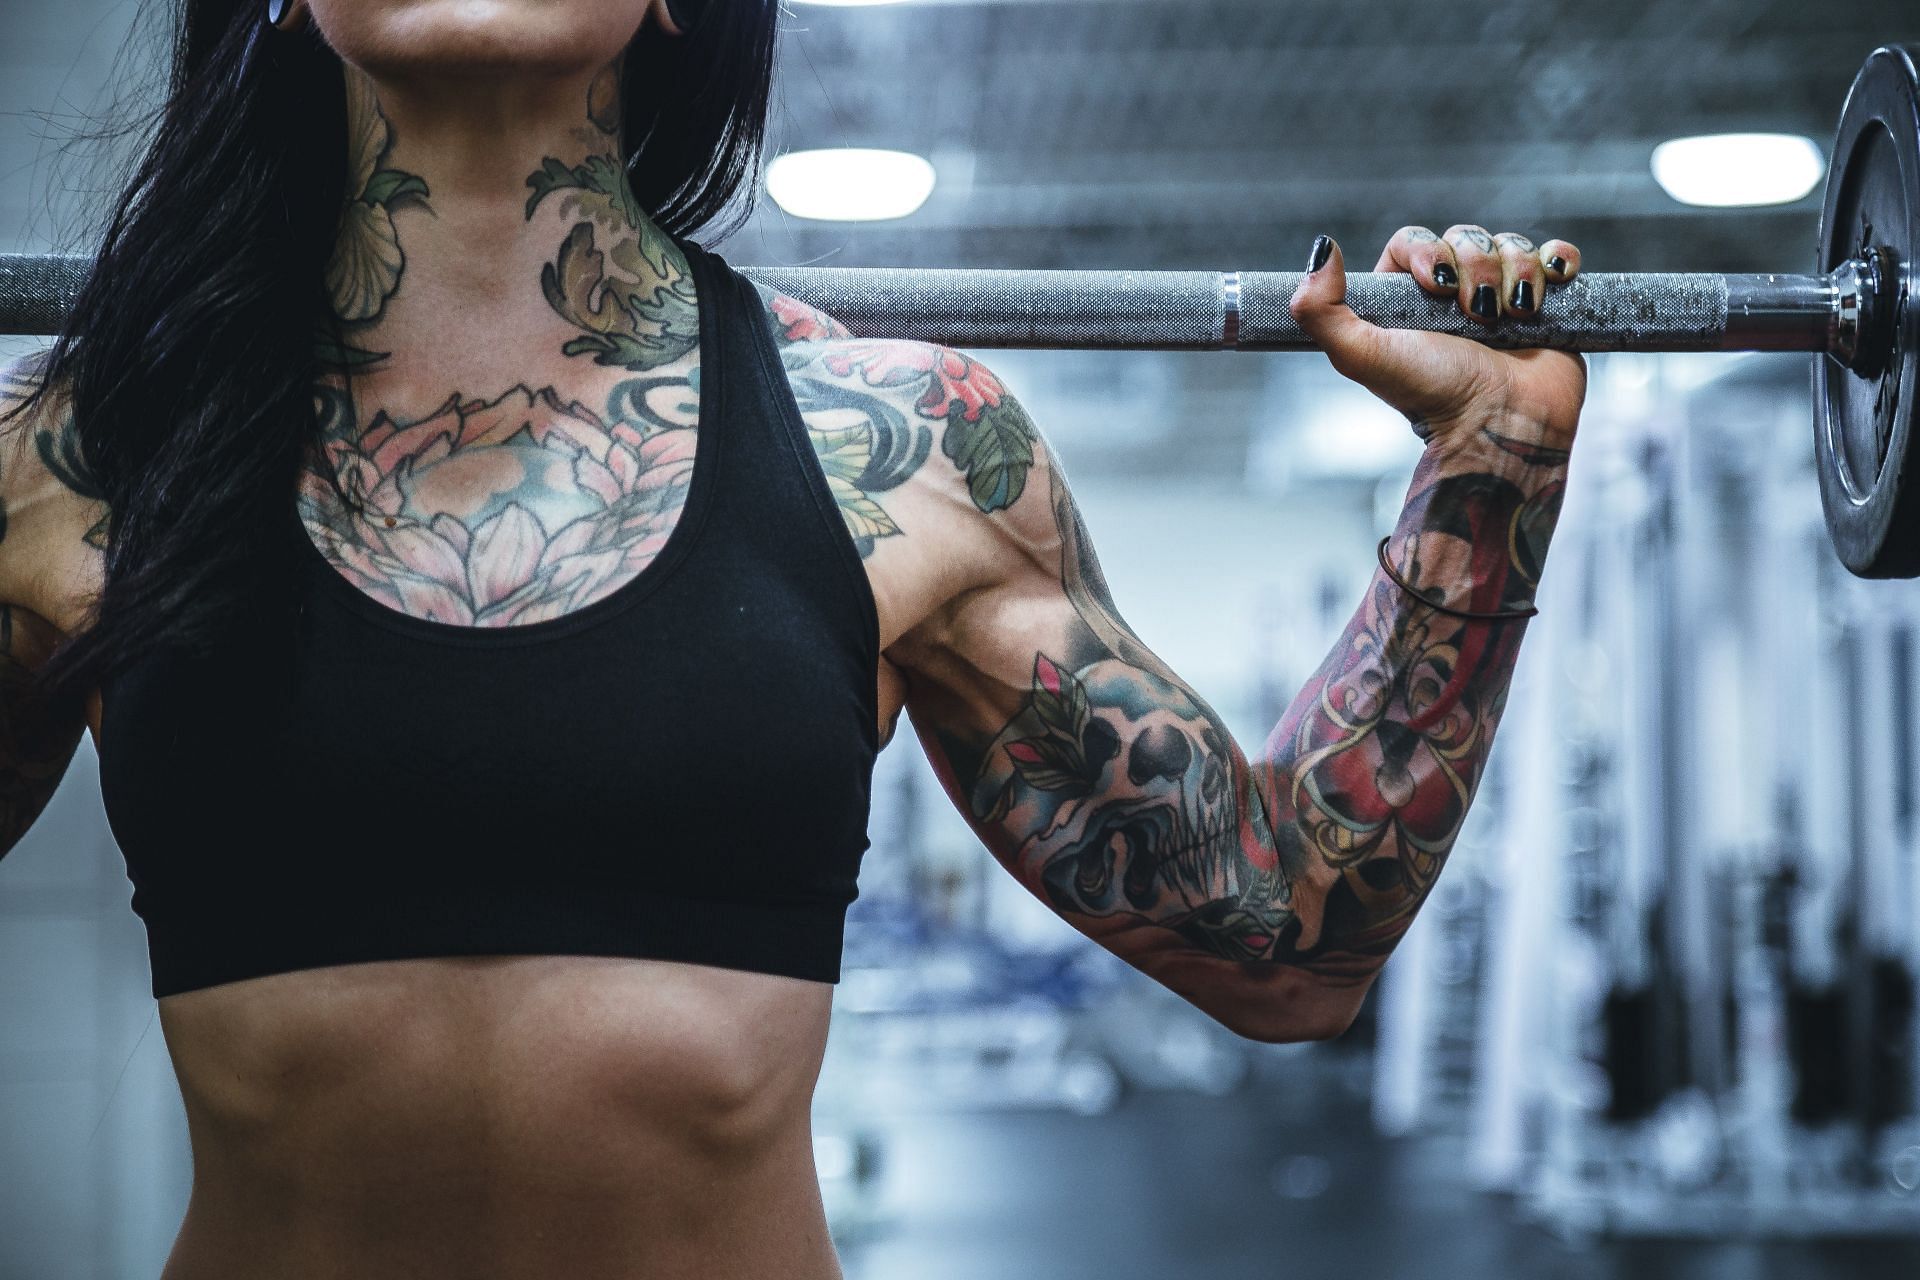 Best beginner exercises for arms using walls. (Image via Unsplash/Alora Griffiths)